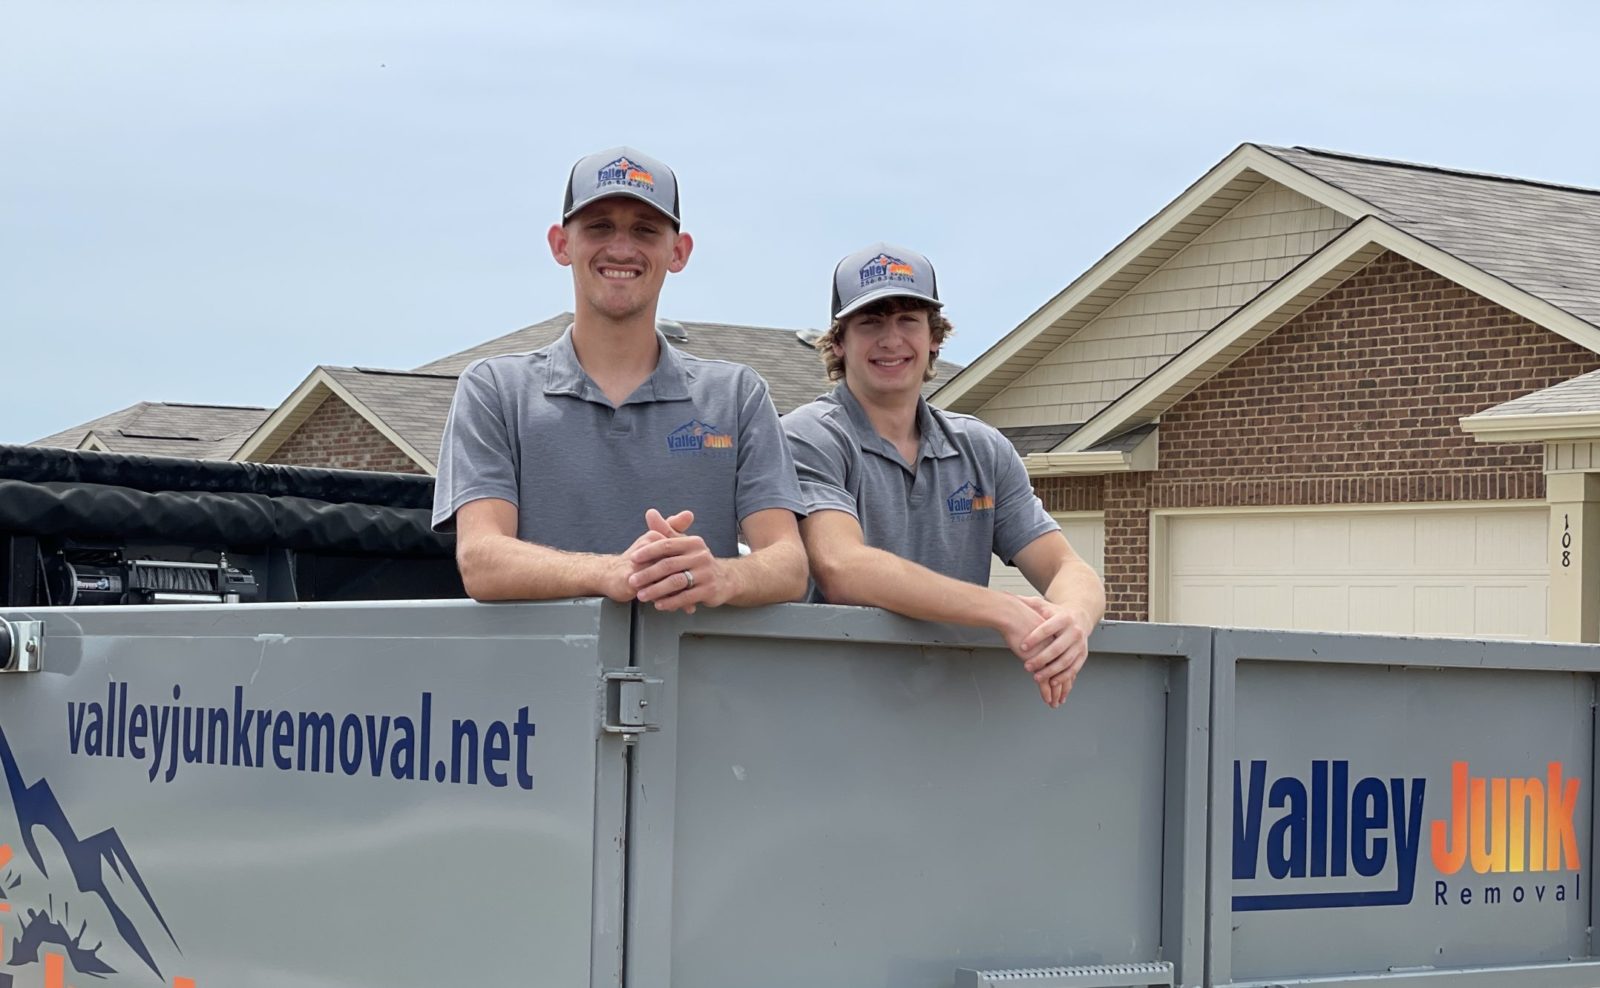 friendly cleanout services with valley junk removal in alabama, two crew members standing in junk removal truck before services